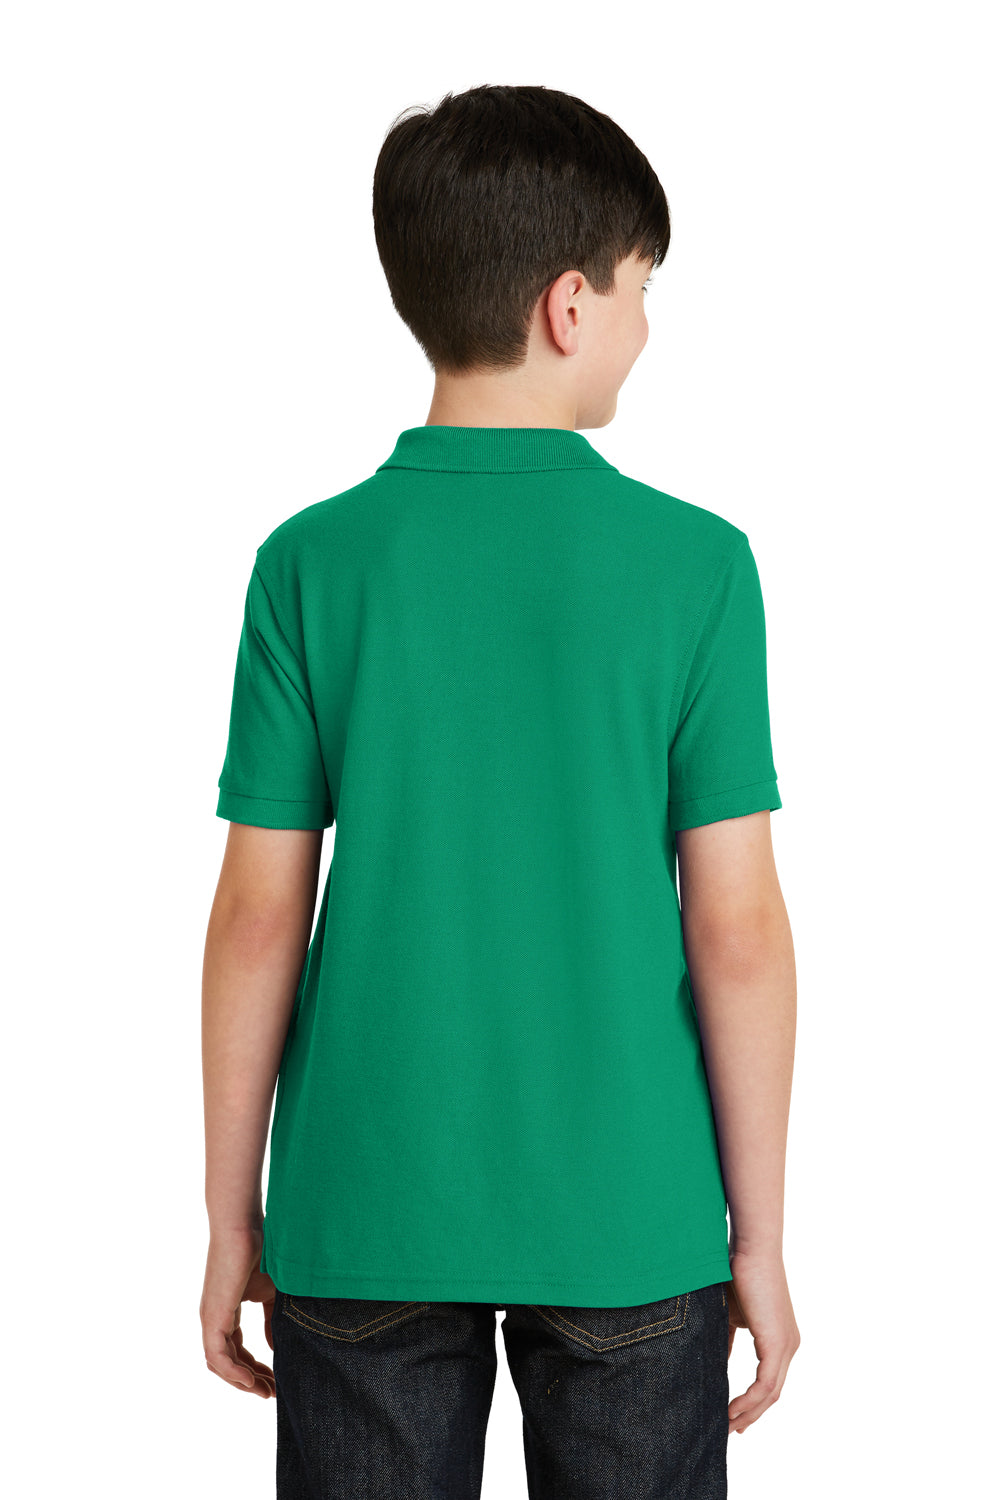 Port Authority Y500 Youth Silk Touch Wrinkle Resistant Short Sleeve Polo Shirt Kelly Green Back